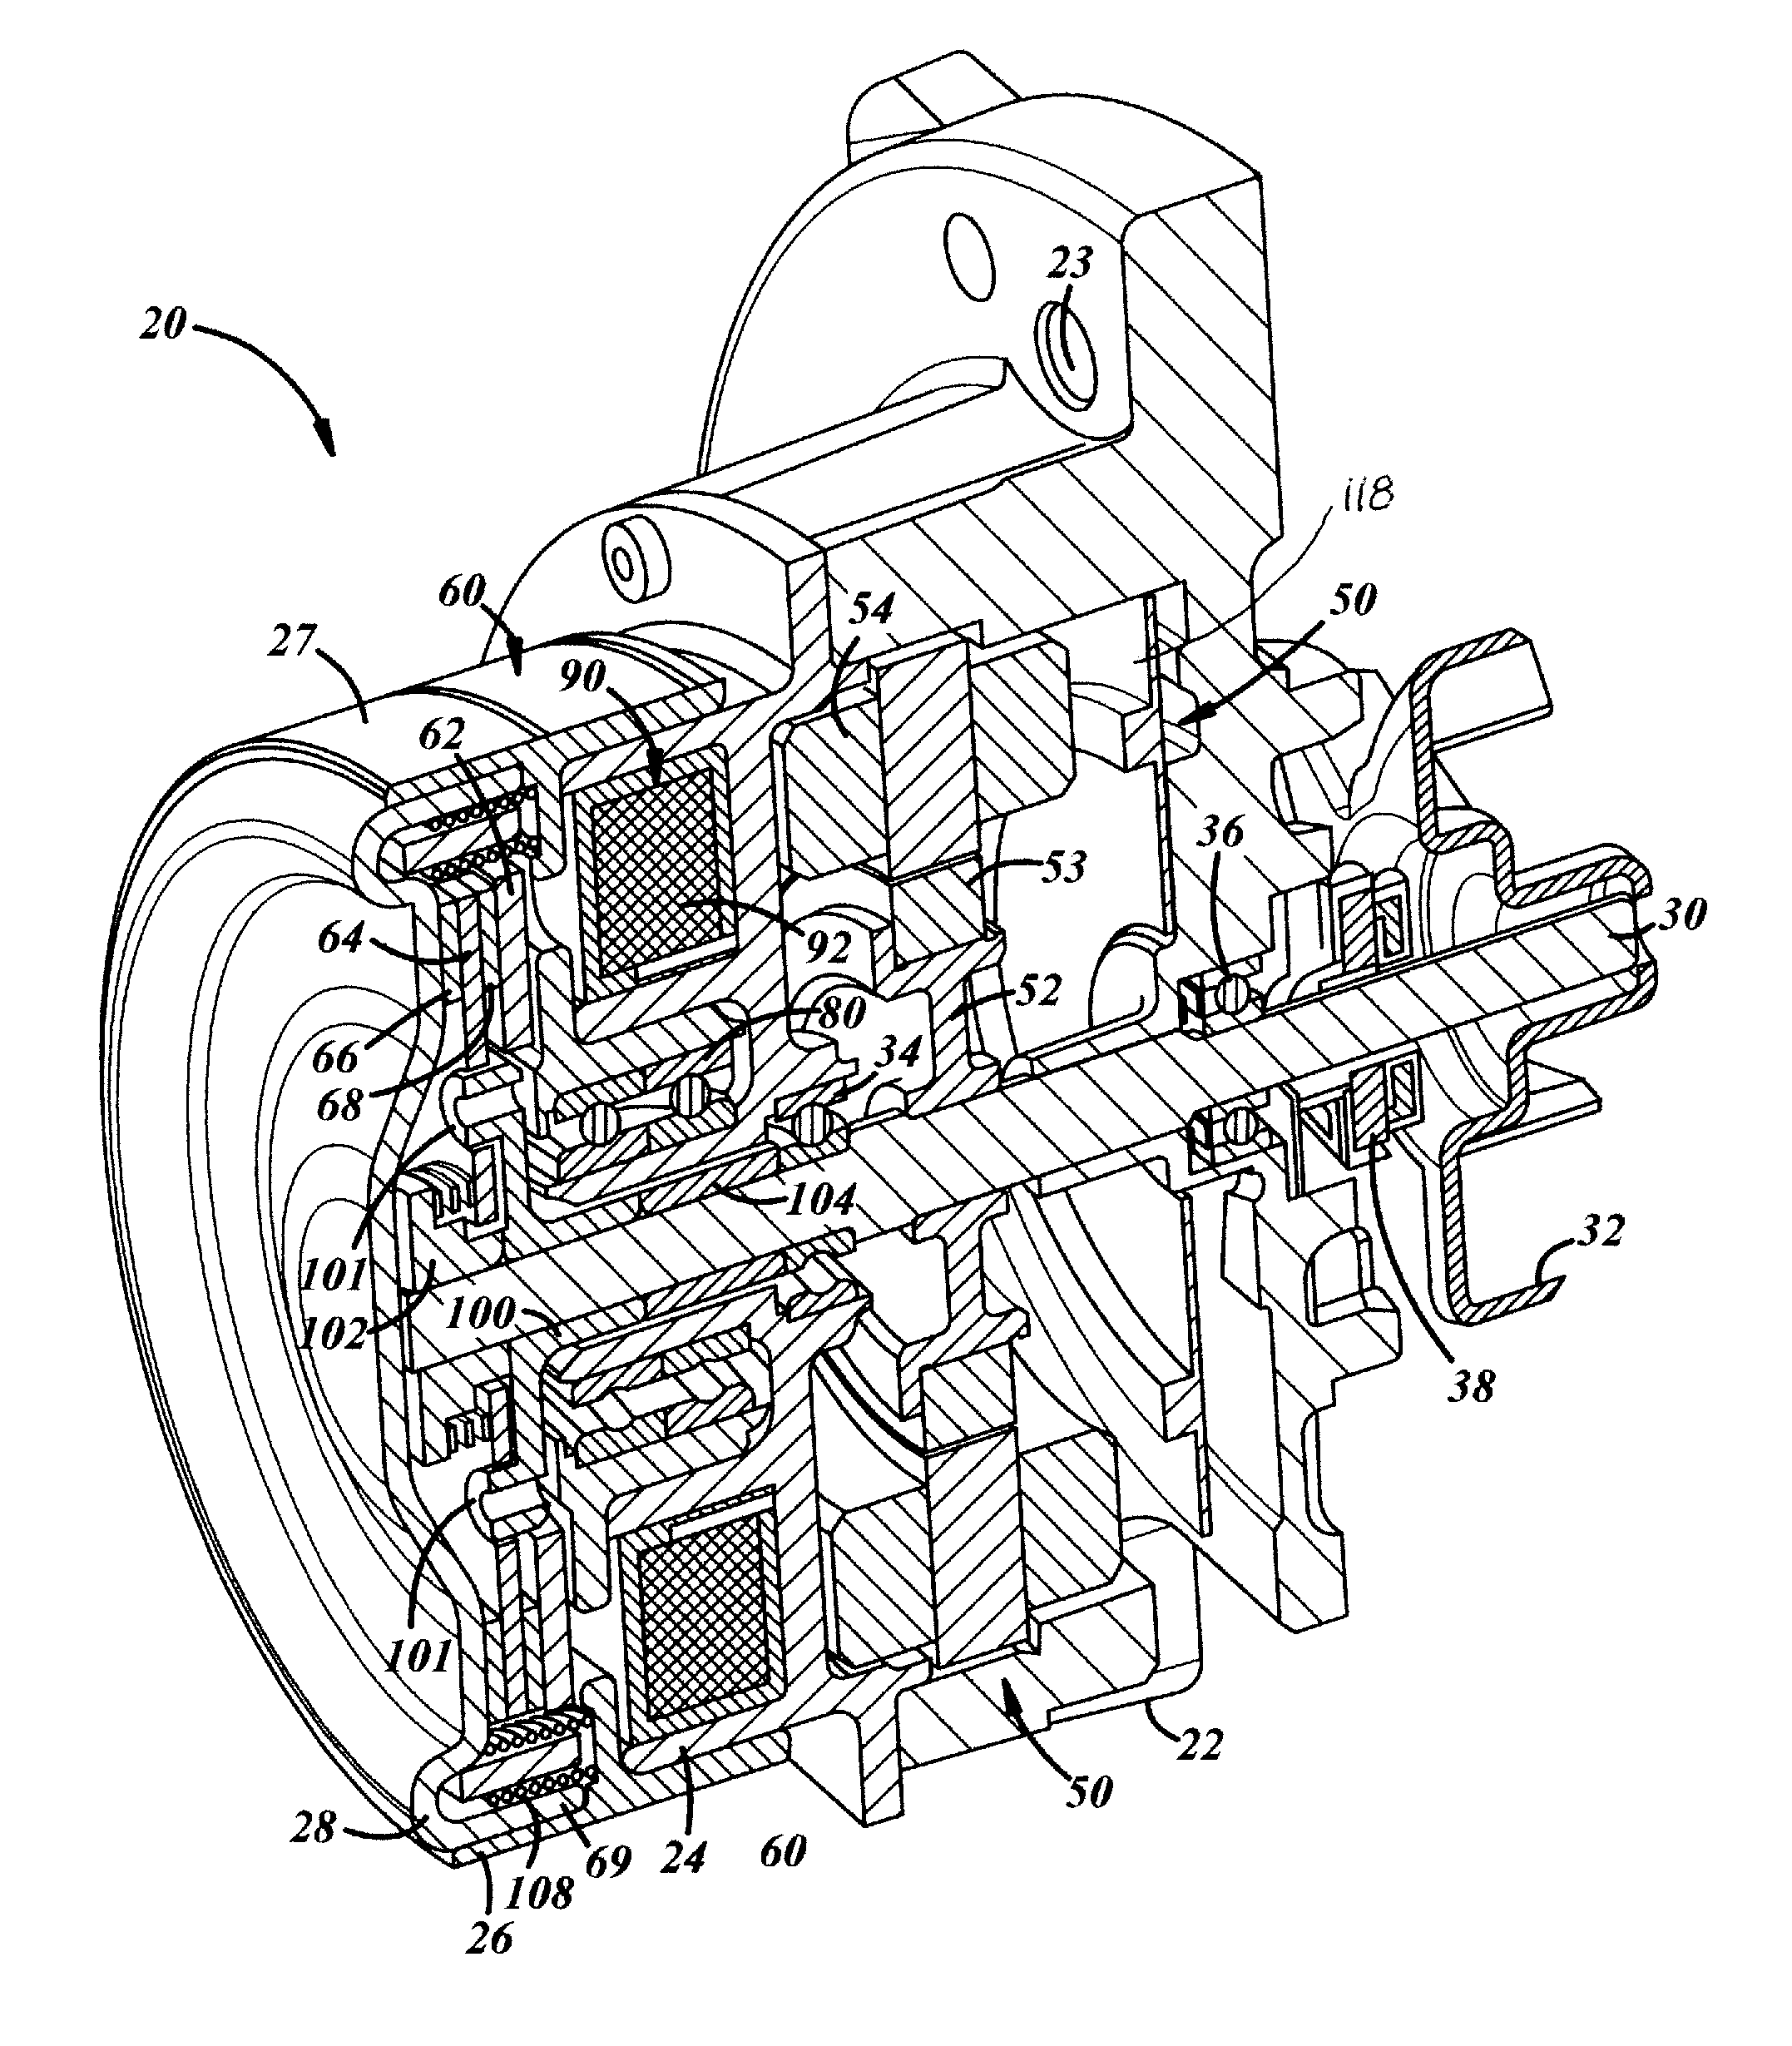 Accessory Drive With Friction Clutch And Electric Motor